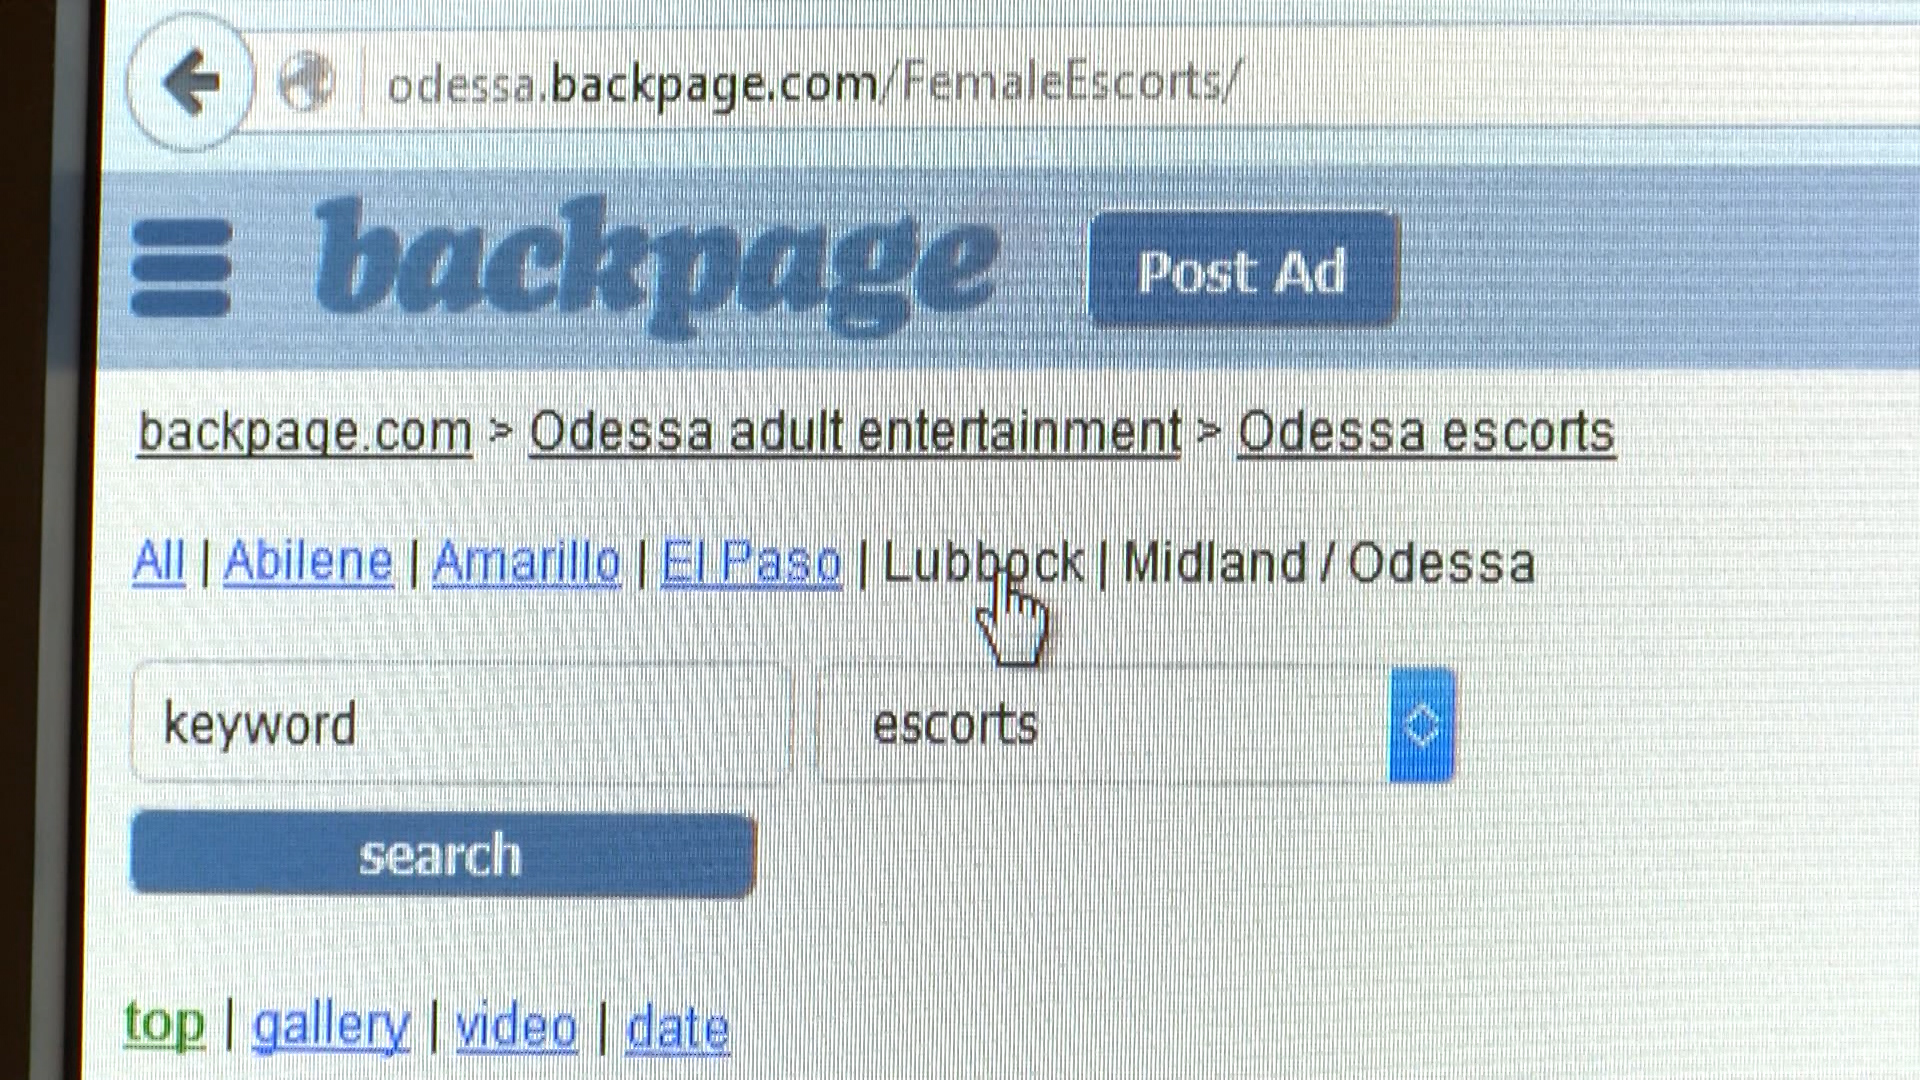 bart horton recommends Www Backpage Com Odessa